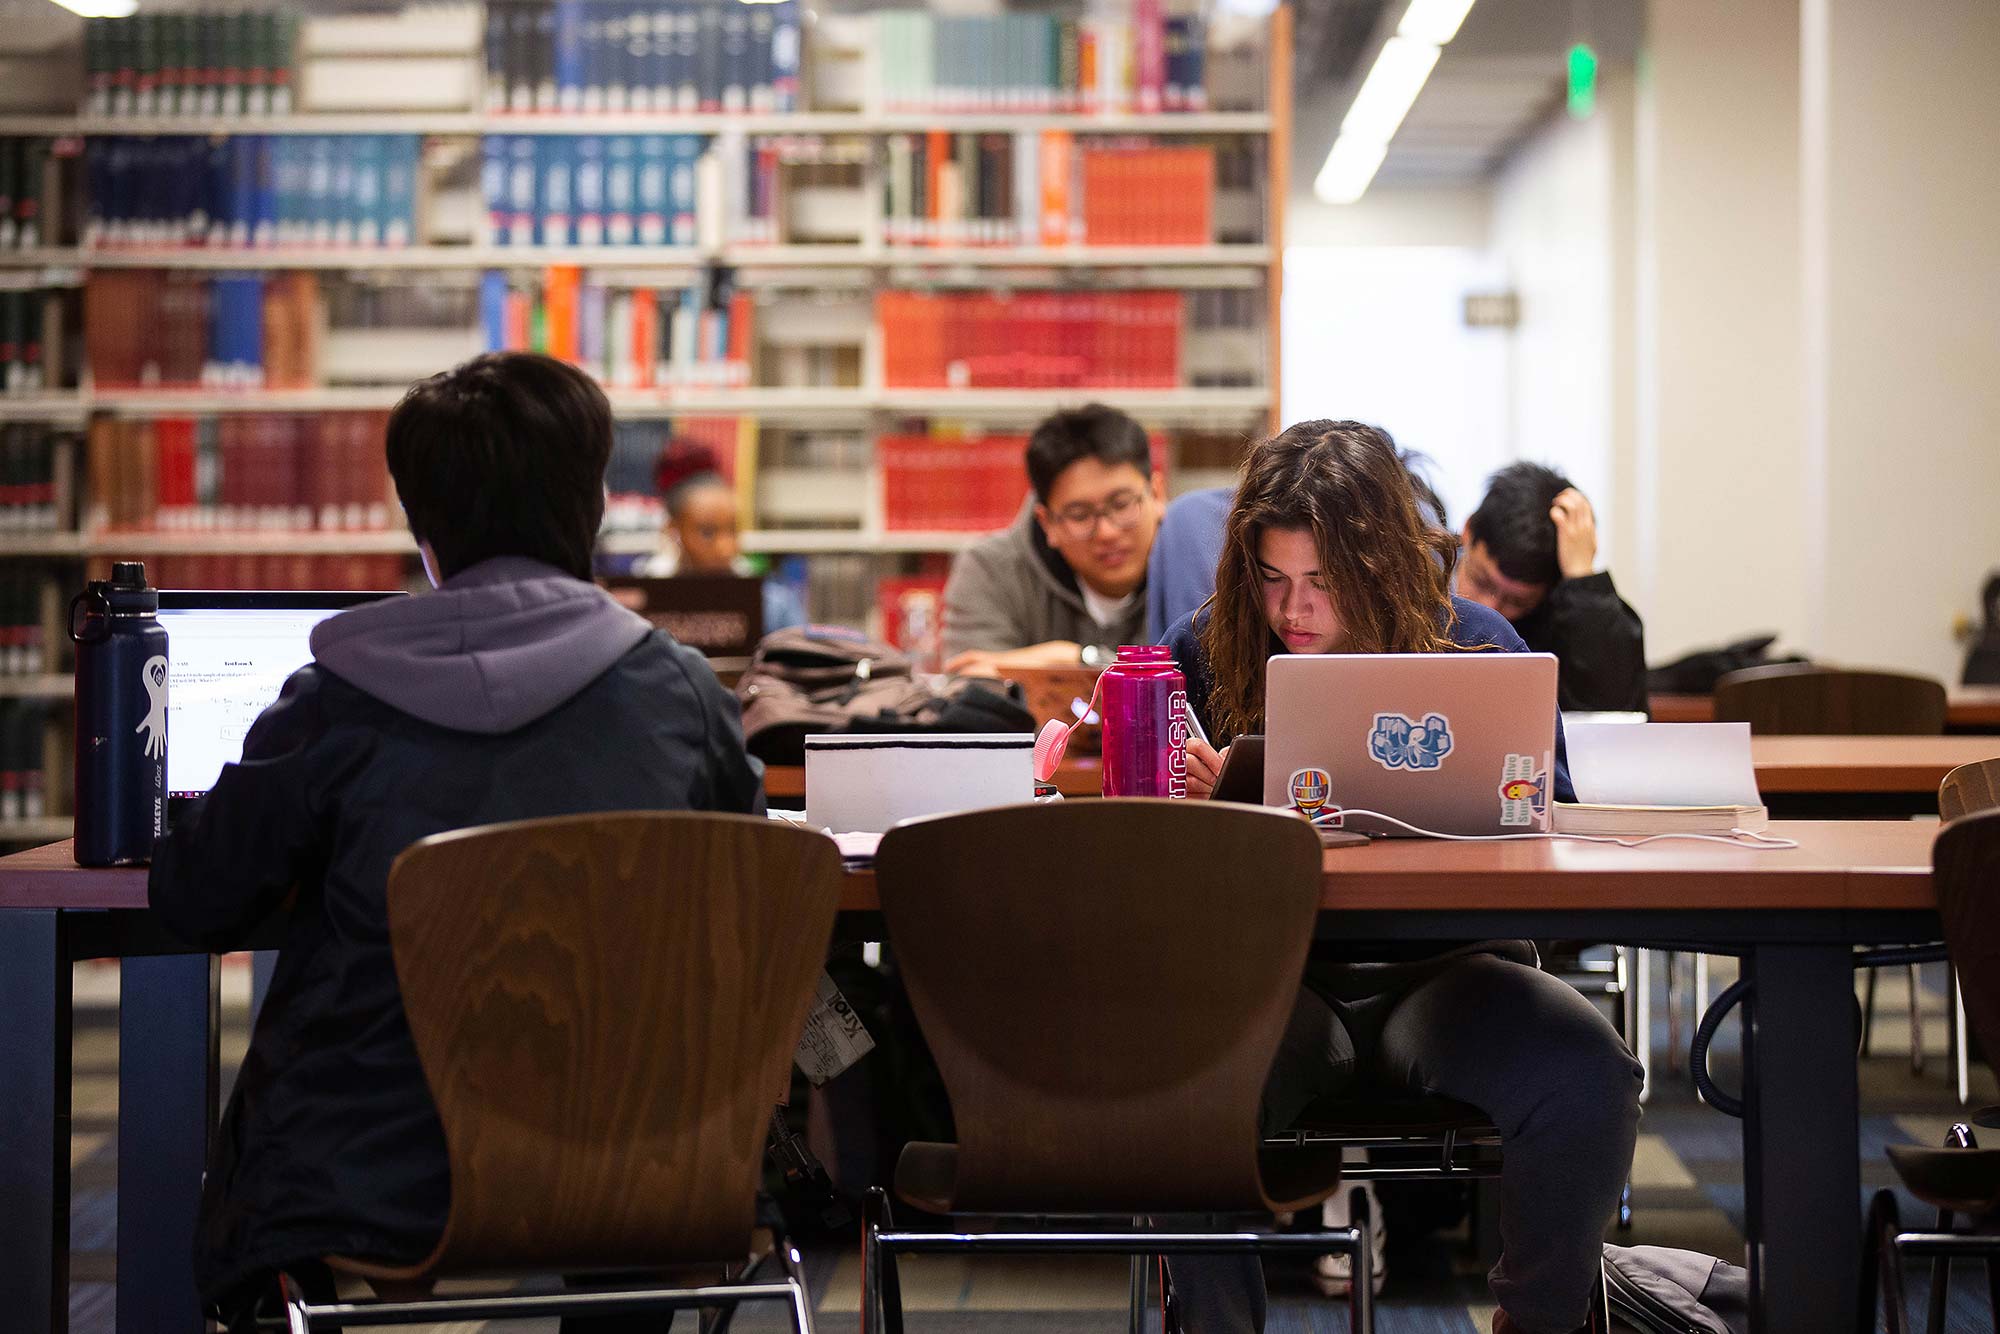 Students studying at library, bookshelves in background